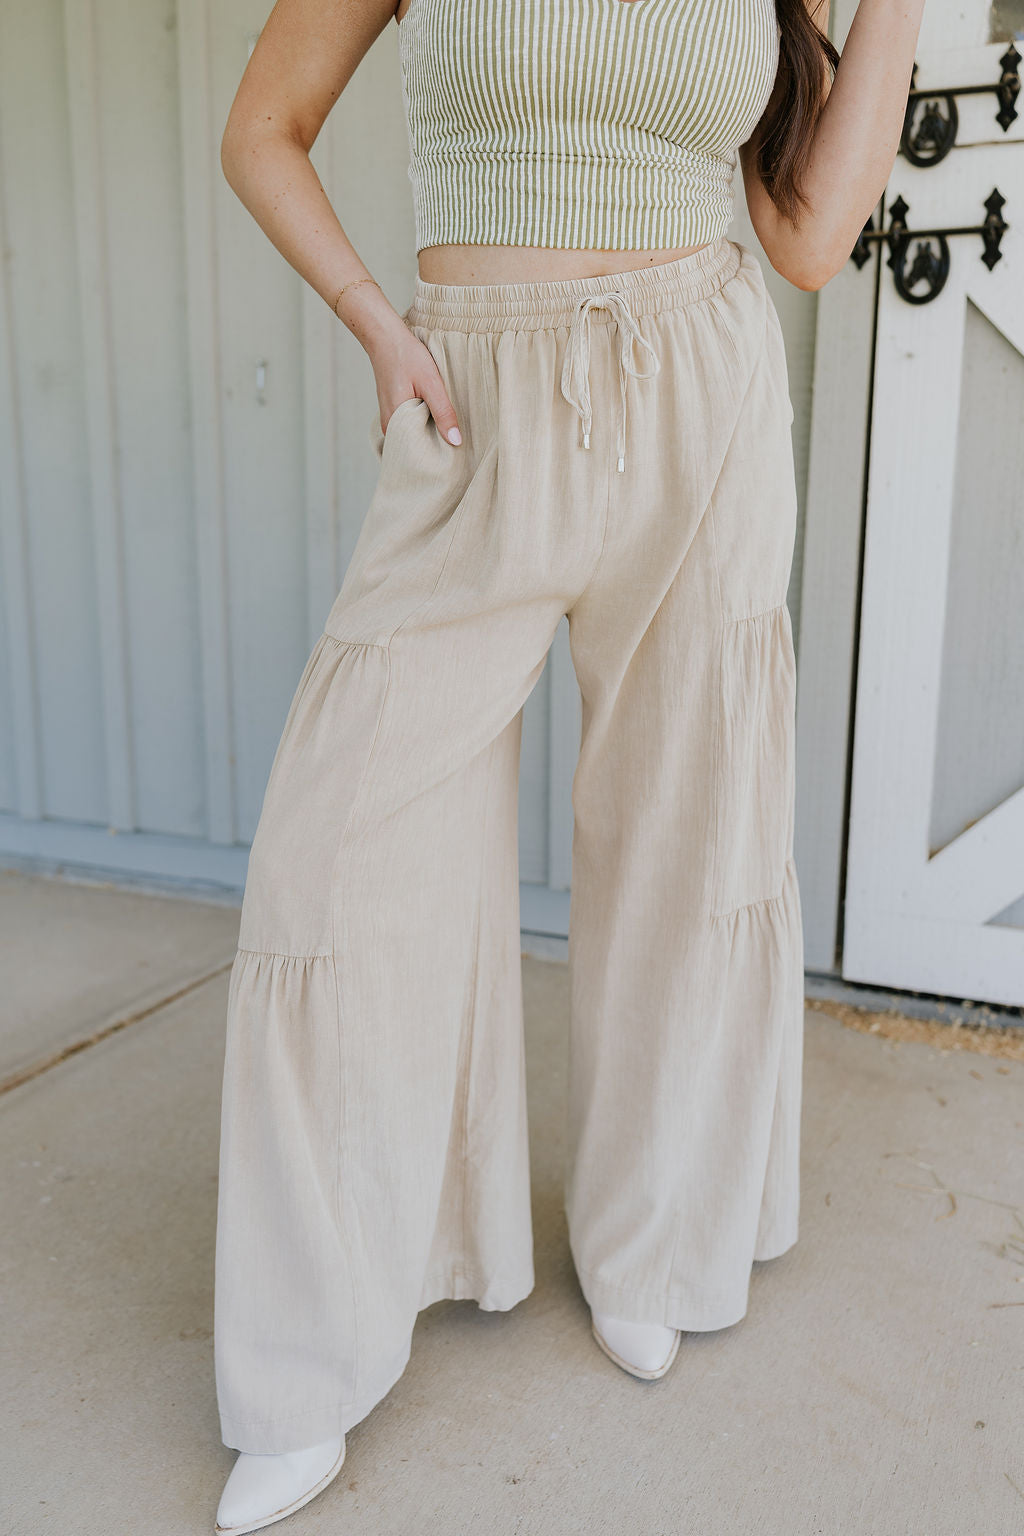 Front view of female model wearing the Carissa Washed Taupe Tiered Flare Pants which features Washed Taupe Cotton Fabric, Side Tiered Design, Flare Pants, Elastic Waistband with Drawstring Tie and Side Pockets